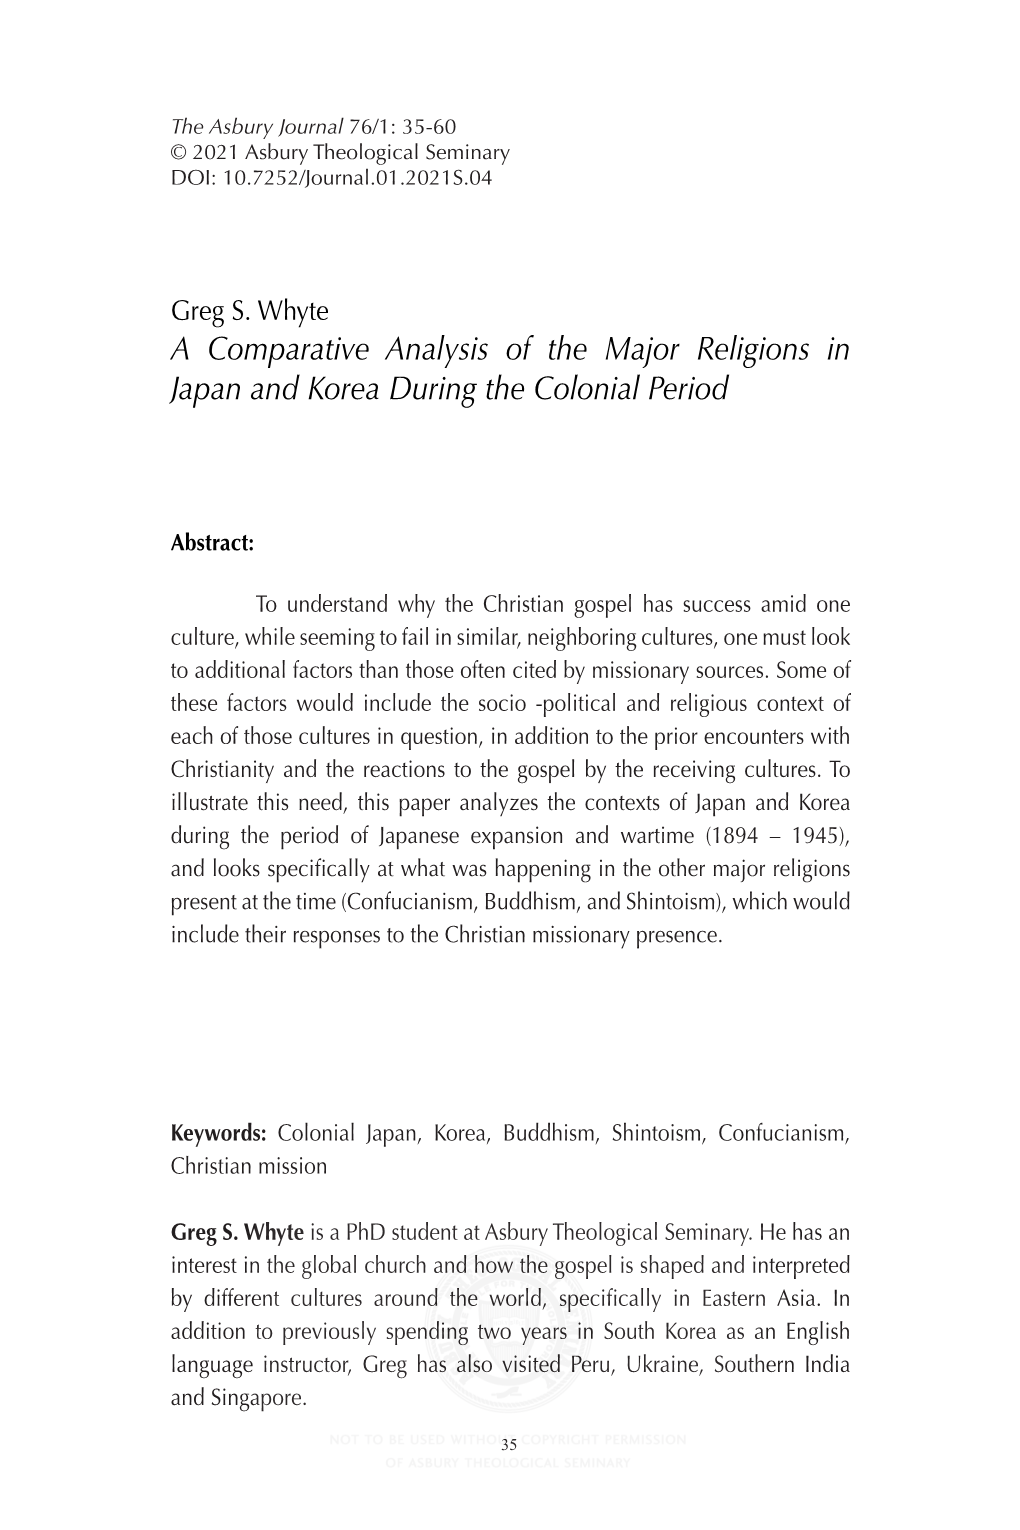 A Comparative Analysis of the Major Religions in Japan and Korea During the Colonial Period